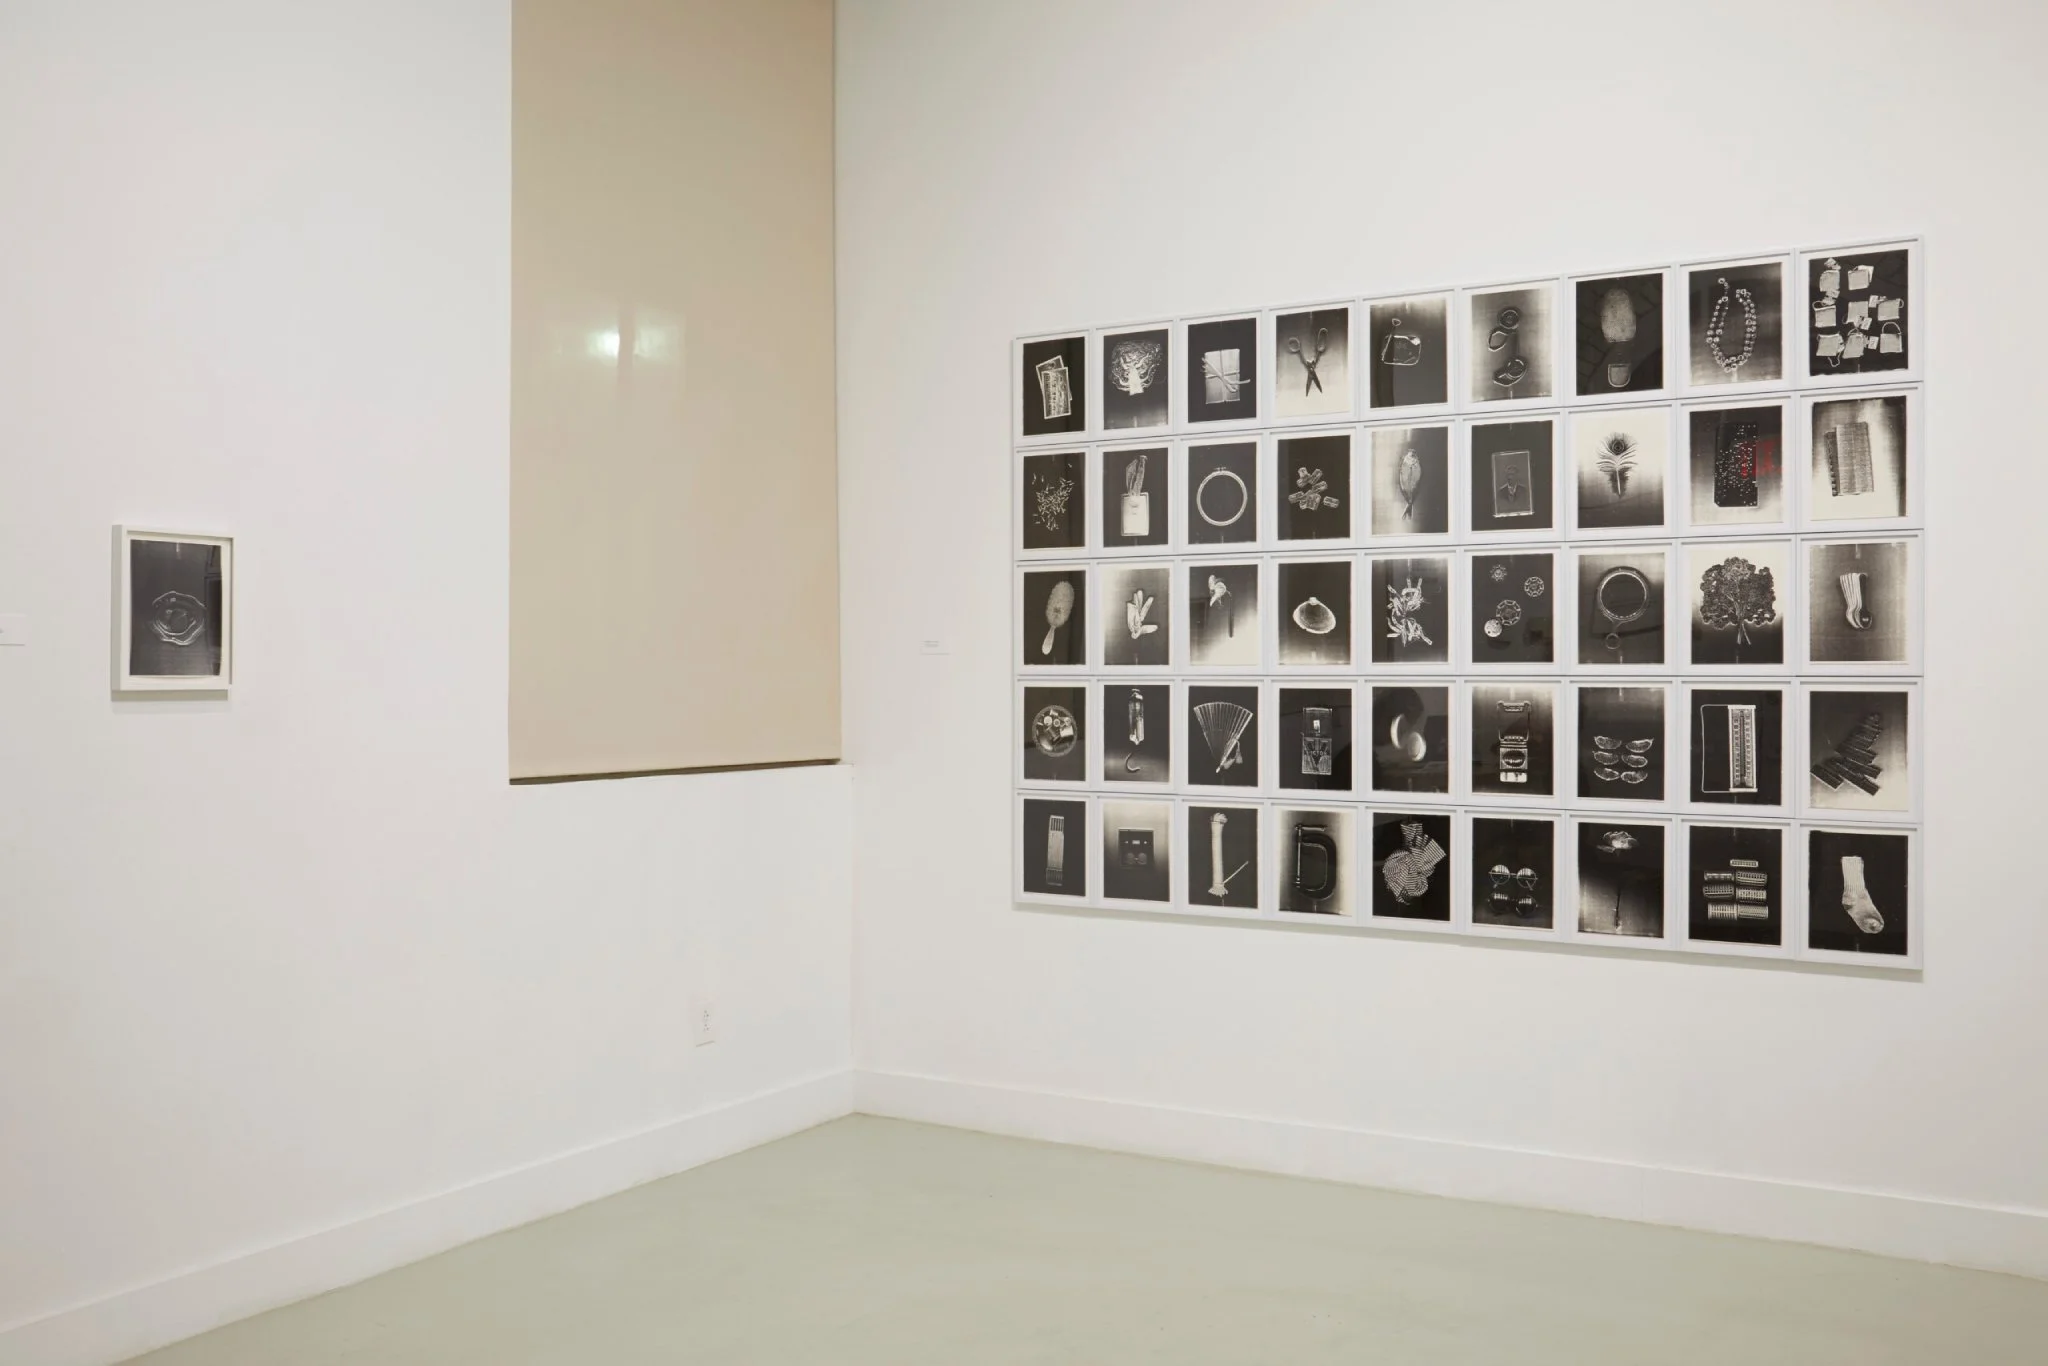 Installation view from Pati Hill: Photocopier - A Survey of Prints and Books (1974 - 83).